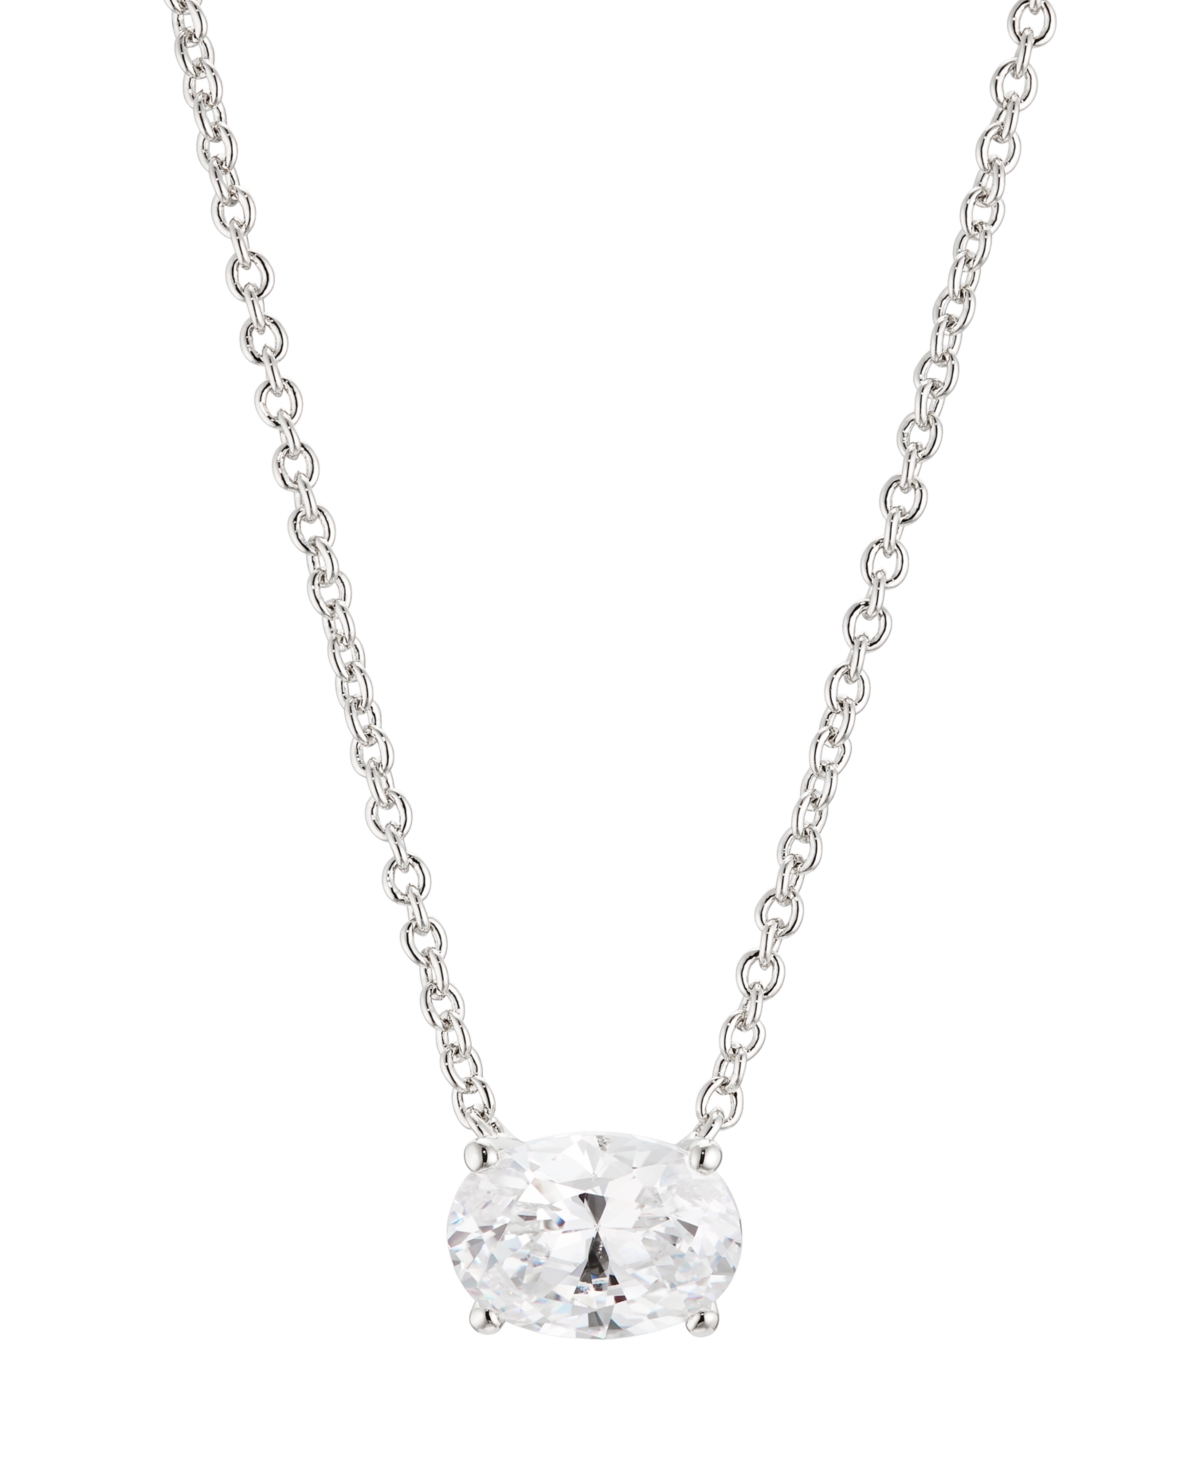 Oval Cubic Zirconia Necklace, 16" + 2" extender, Created for Macy's - Gold